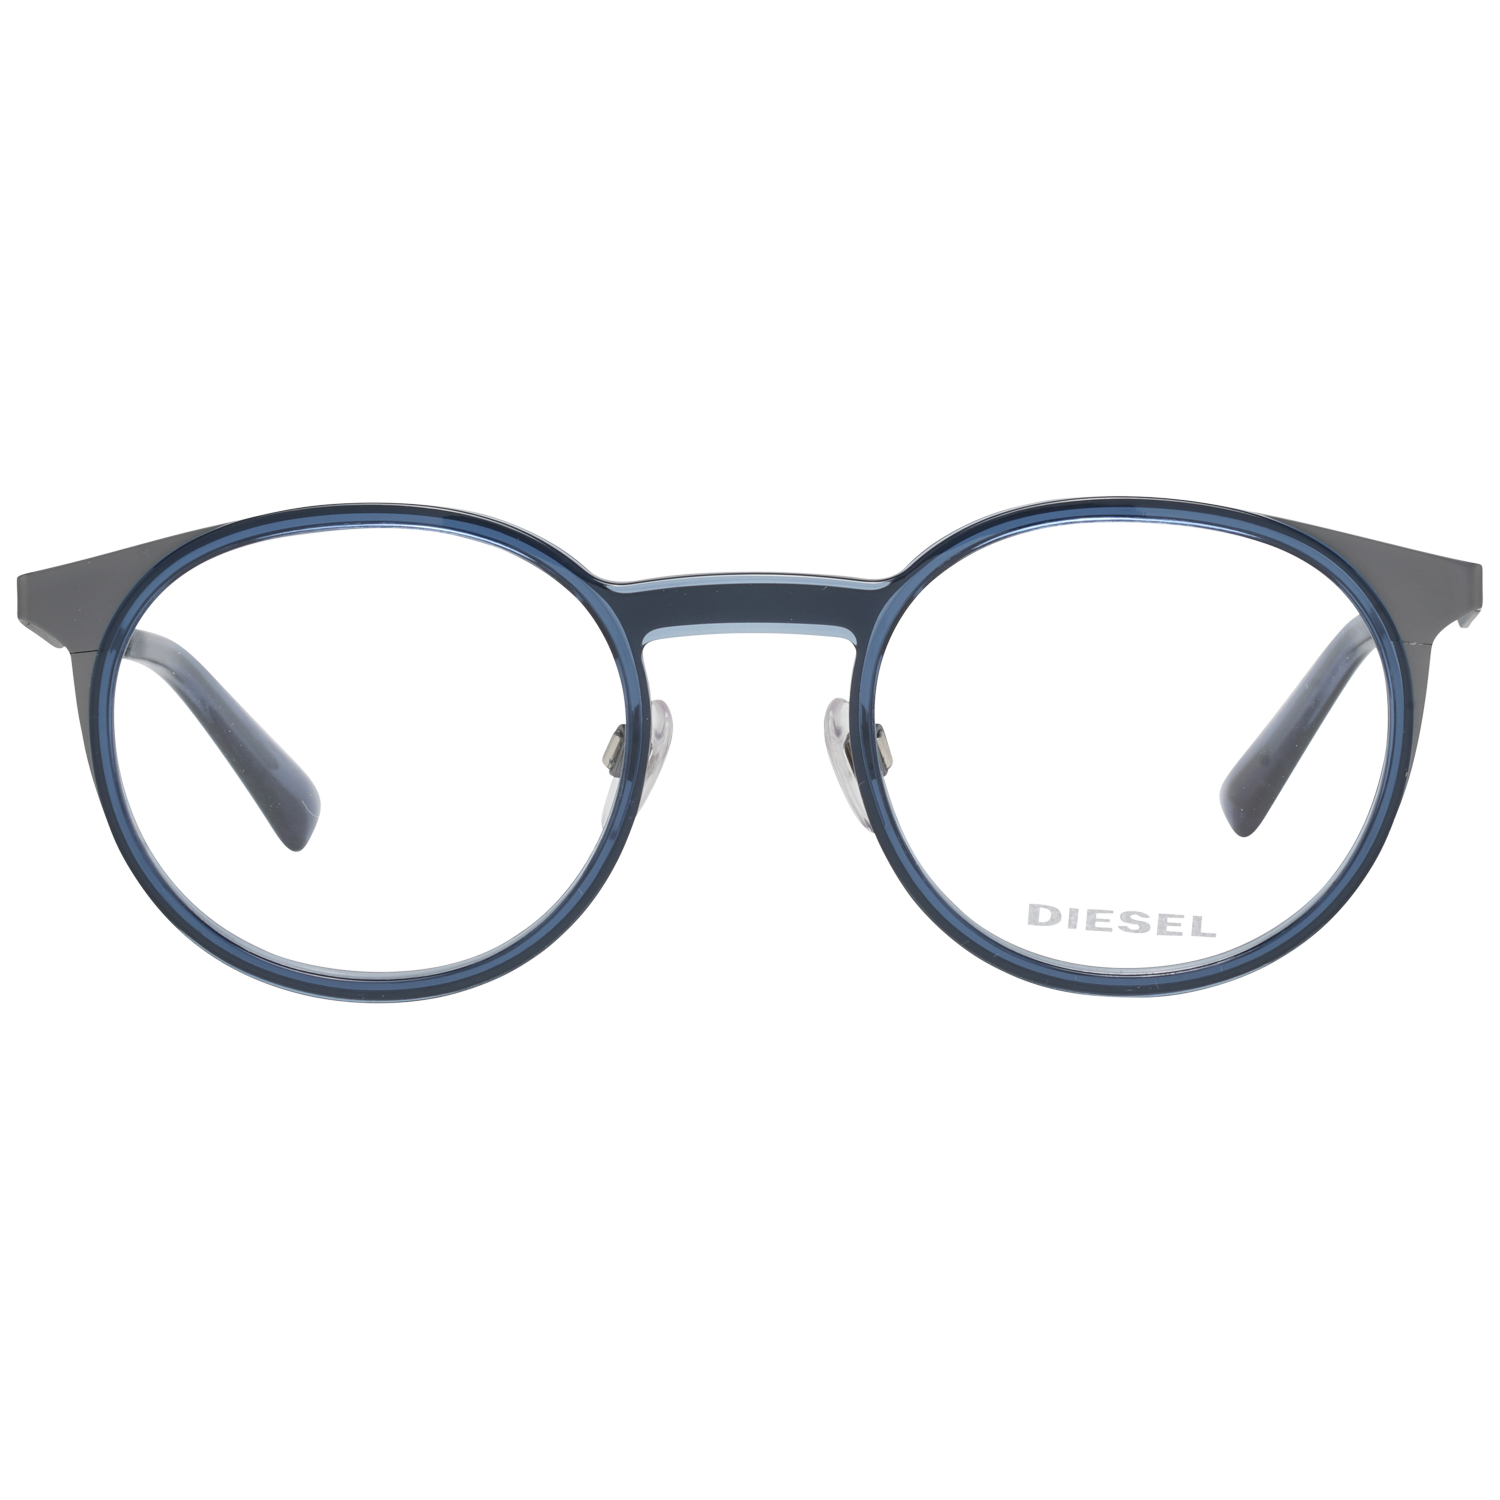 GenderUnisexMain colorBlueFrame colorBlueFrame materialMetal & PlasticSize49-22-145Lenses width49mmLenses heigth42mmBridge length22mmFrame width136mmTemple length145mmShipment includesCase, Cleaning clothStyleFull-RimSpring hingeNo